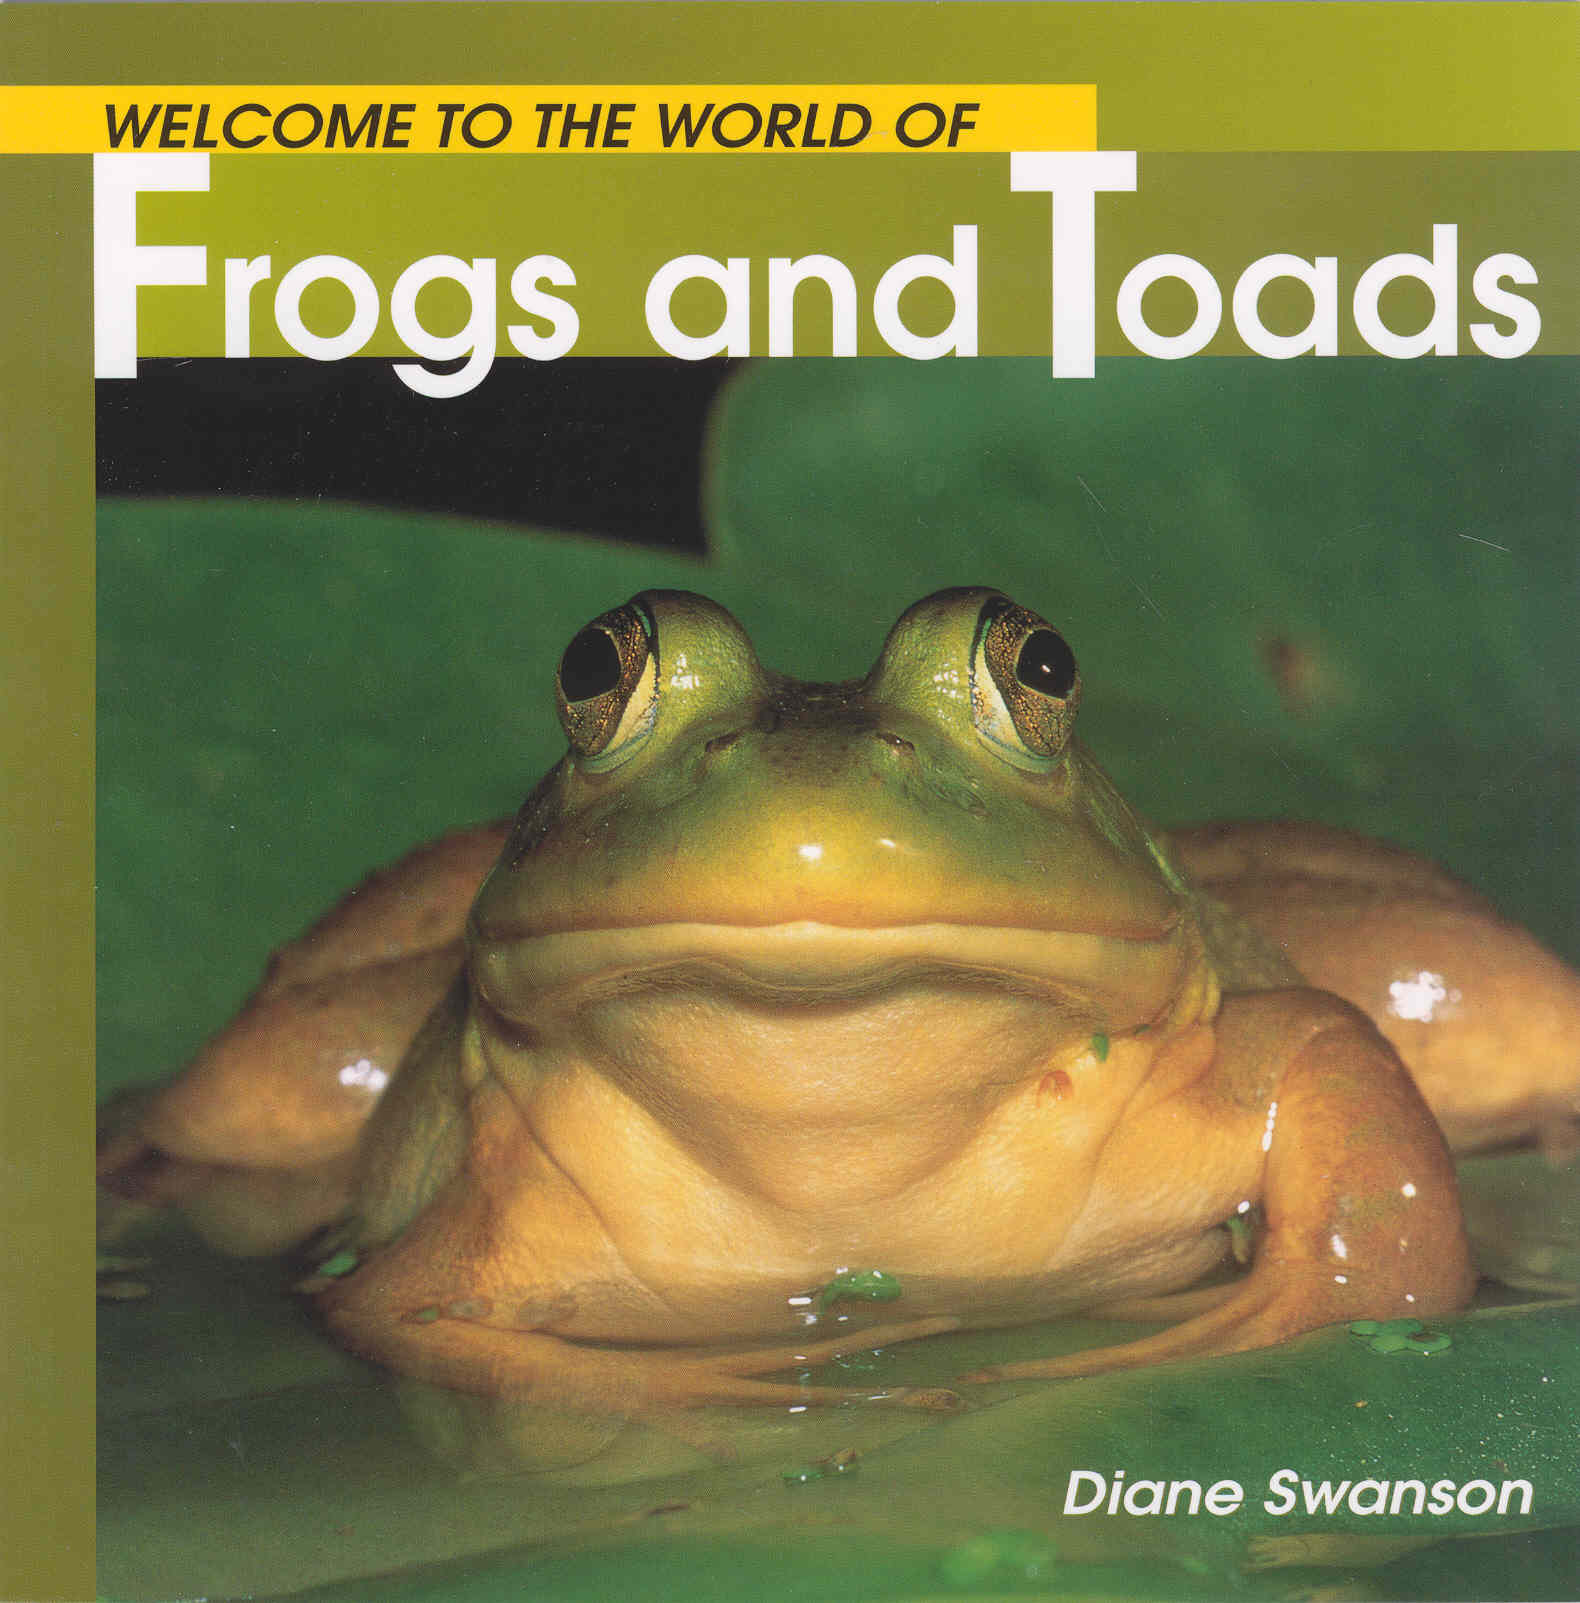 Welcome to the World of Frogs and Toads